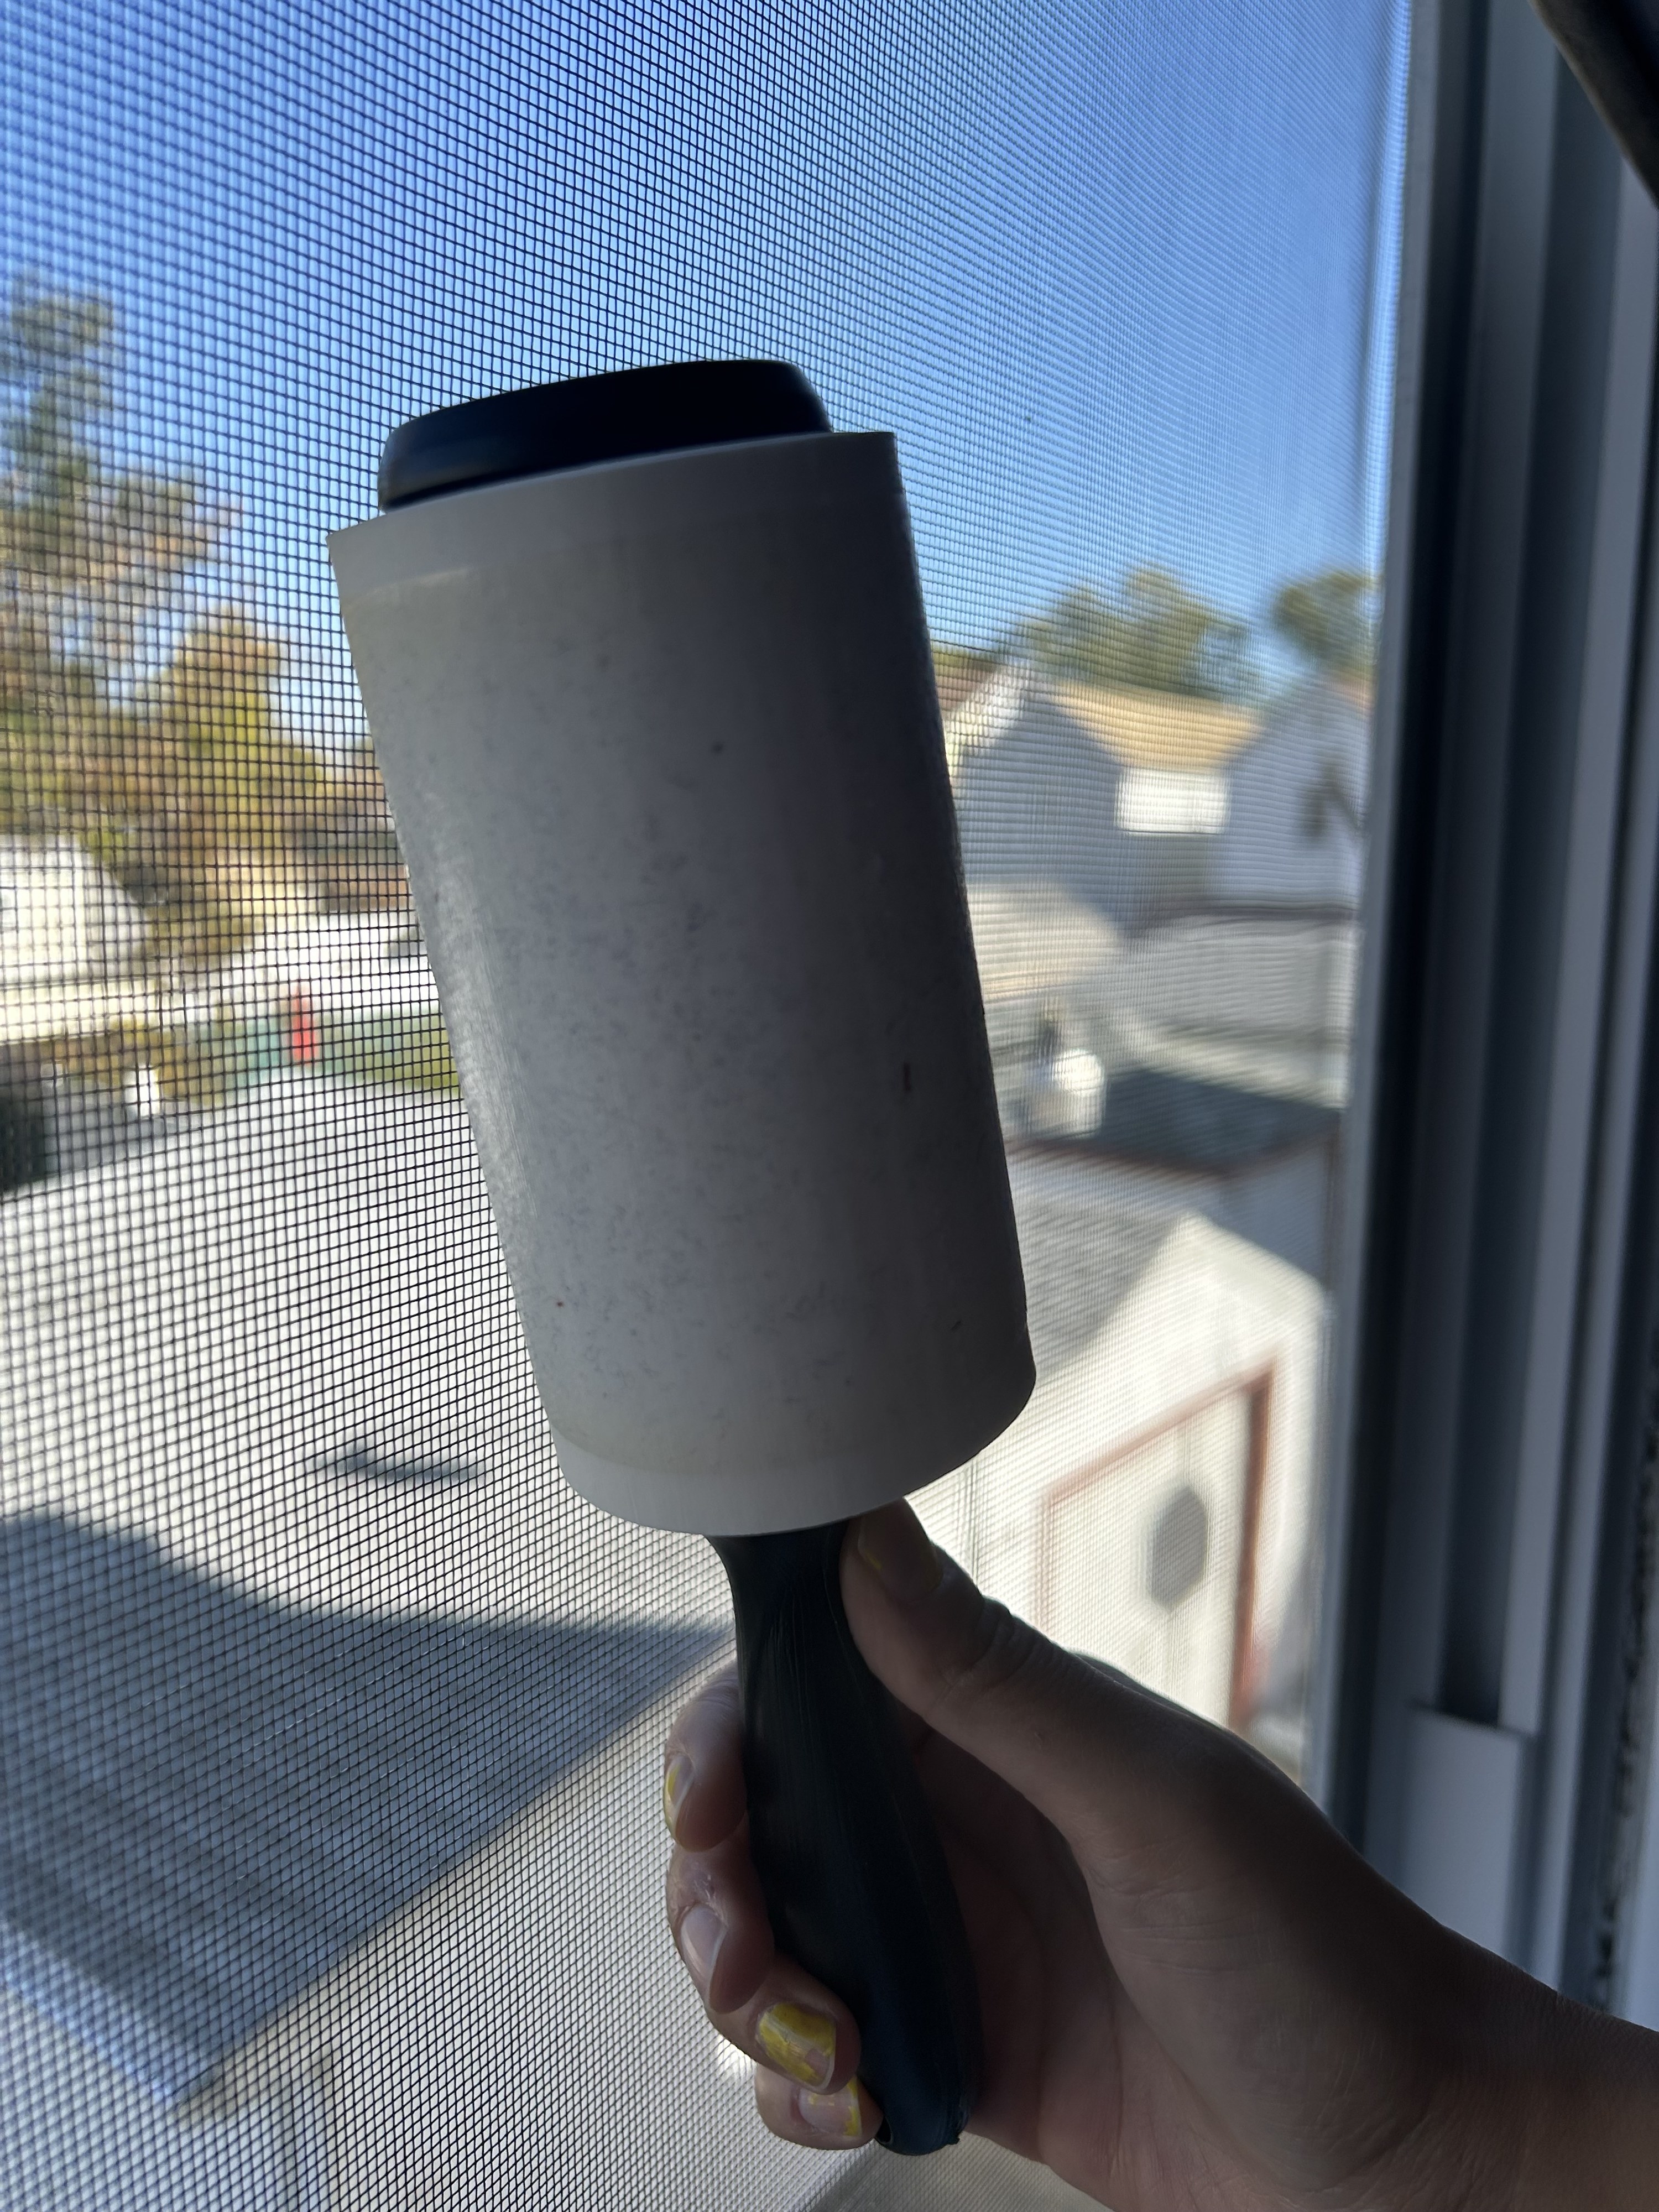 A person using a lint roller to clean a window screen